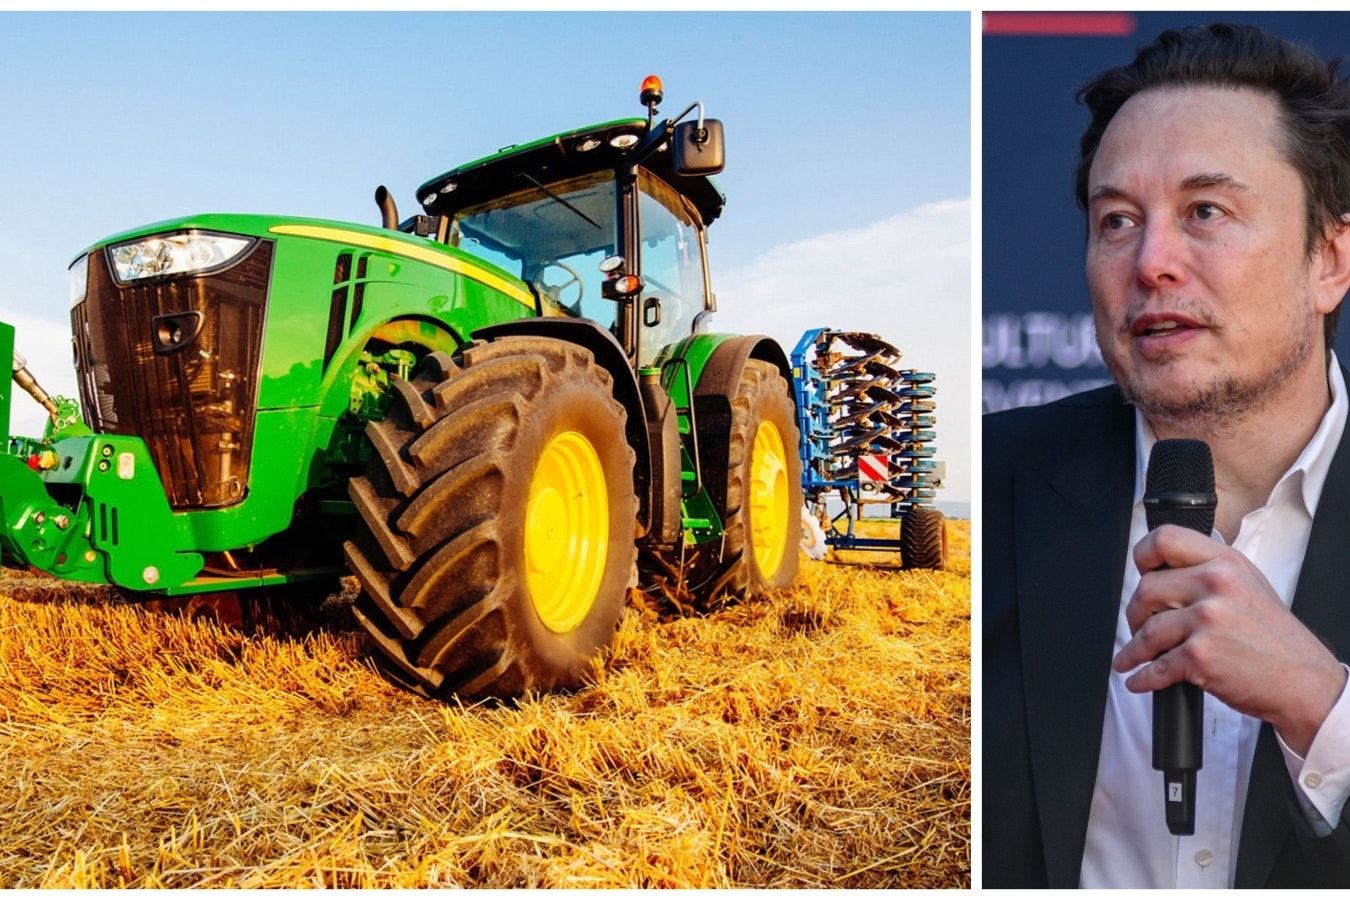 Wyoming farmers say they're skeptical of a new partnership with Elon Musk's SpaceX corp. and Starlink to connect internet to John Deere tractors.